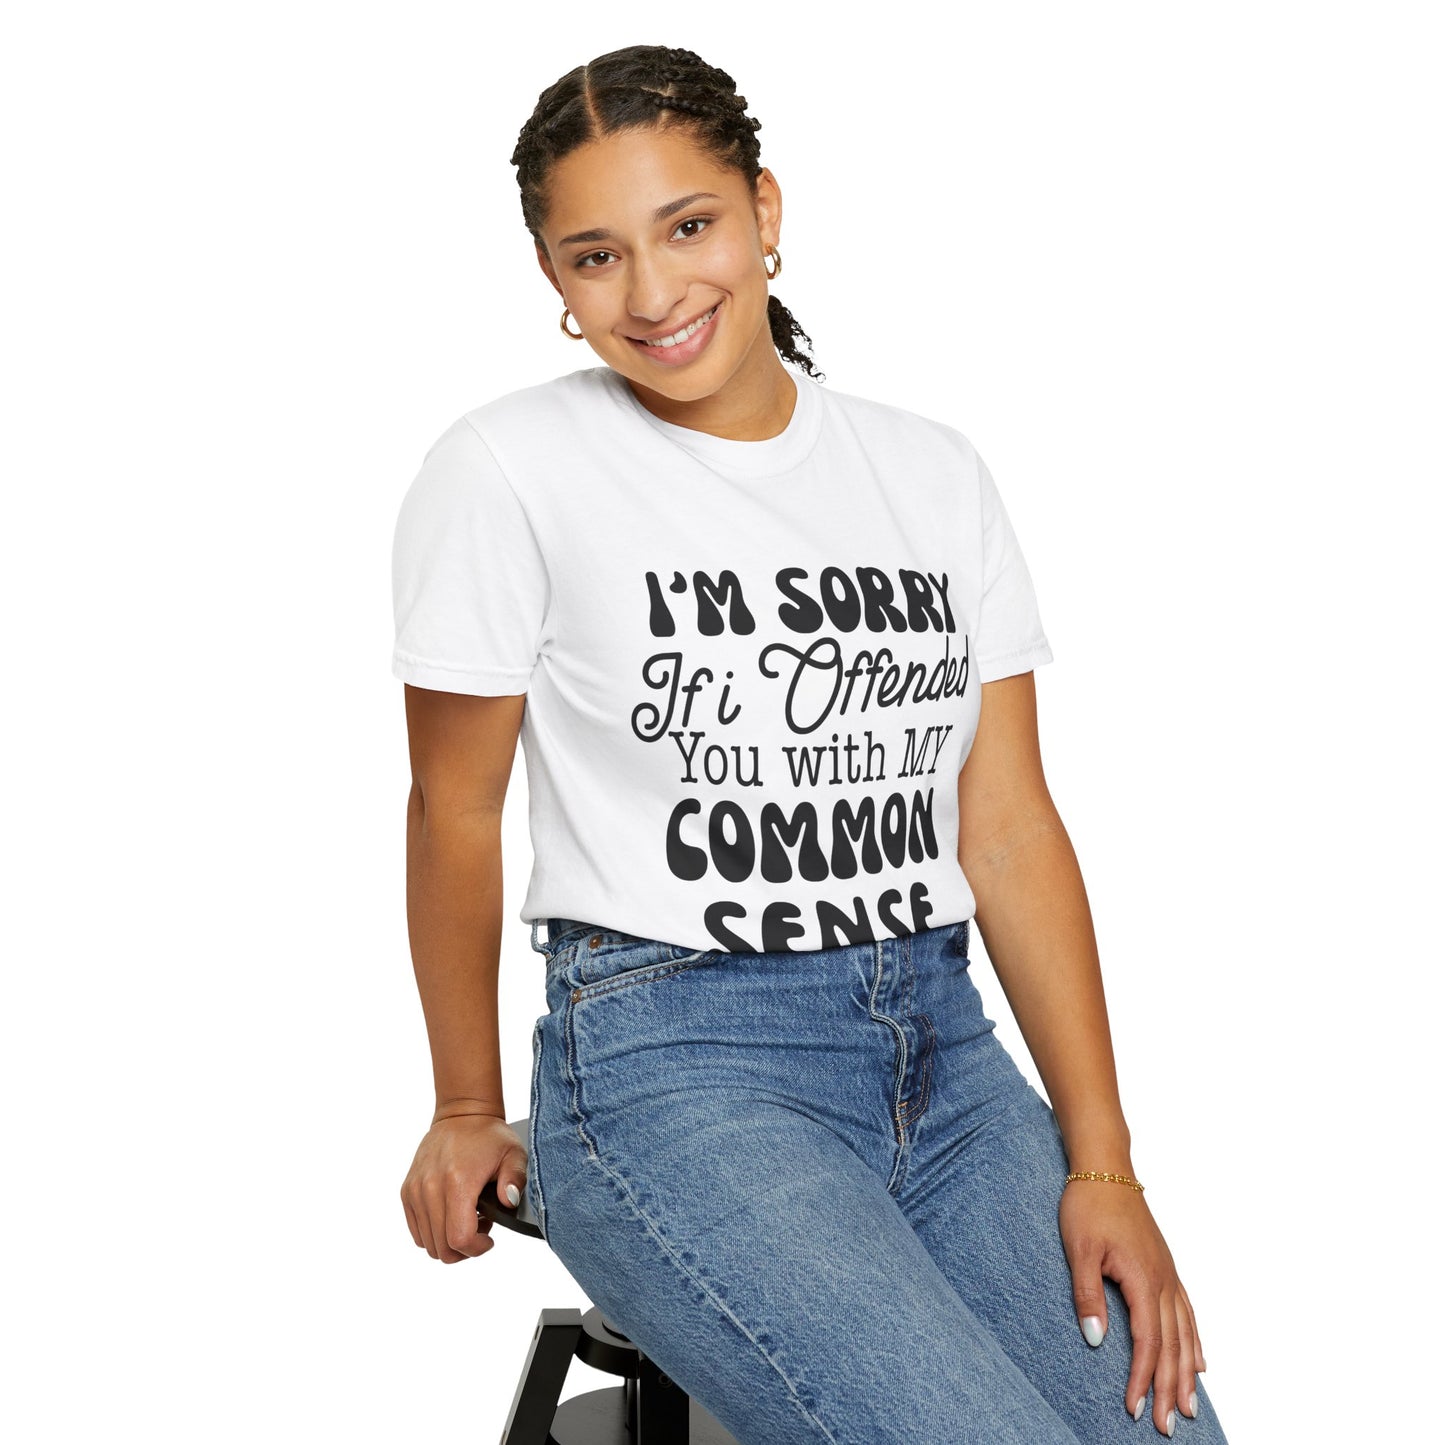 I'm sorry if I offended you - Unisex Garment-Dyed T-shirt